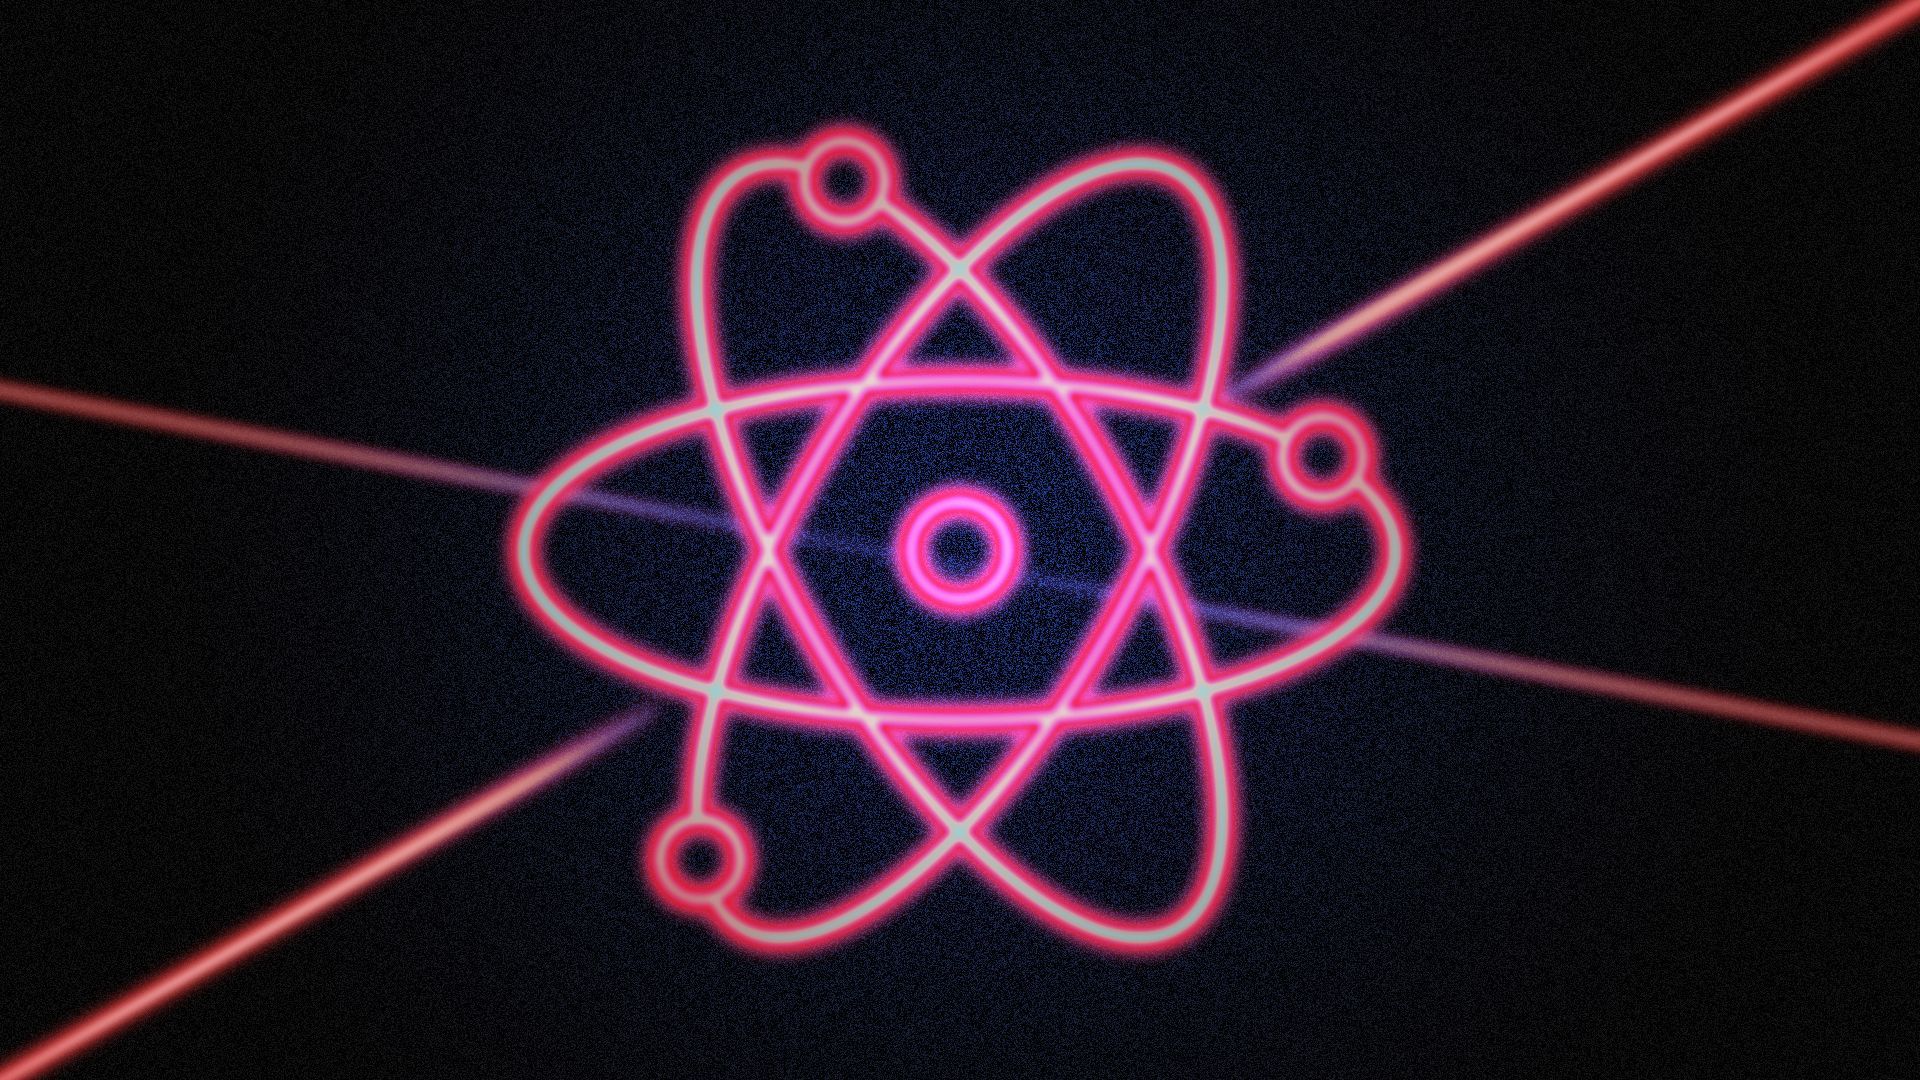 Illustration of an atom shape made my lasers